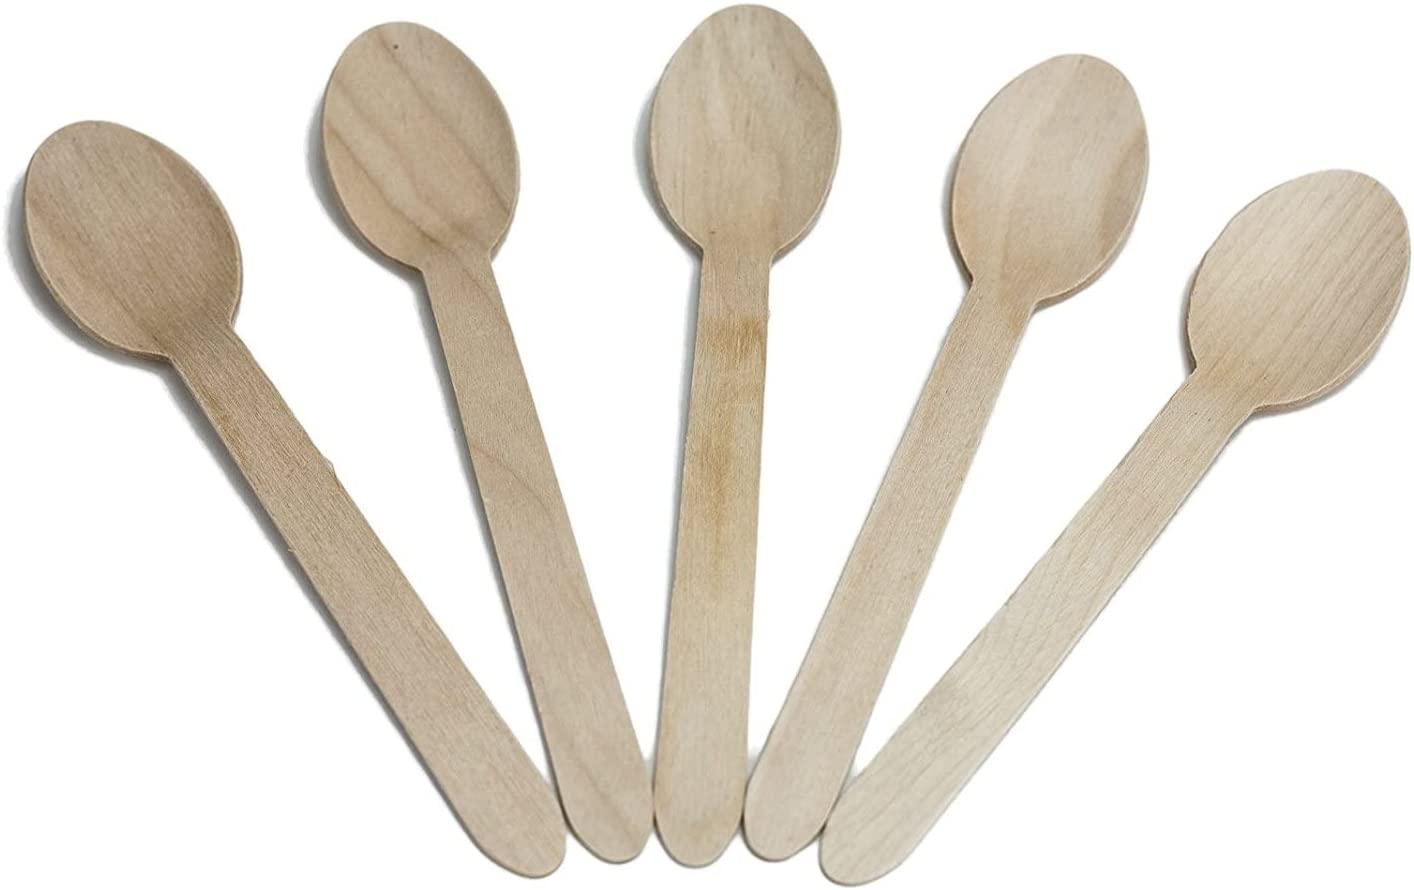 The Best Finishes for Wooden Spoons — Sylva Spoon